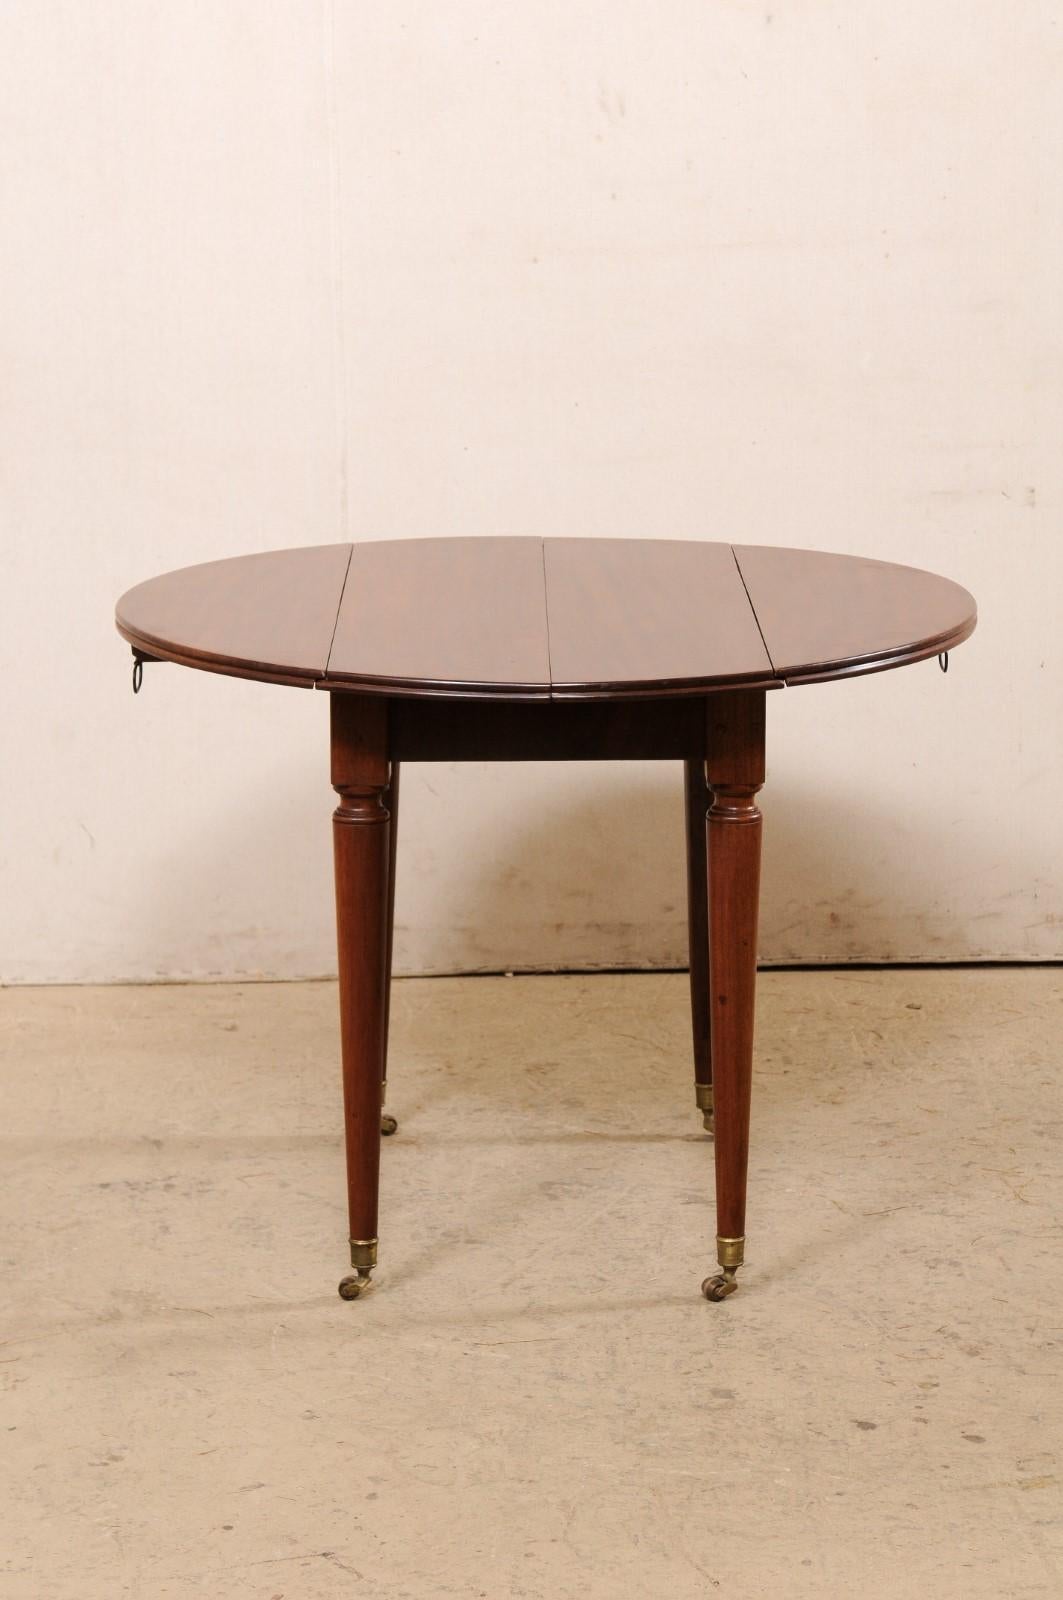 French 19th C. Mahogany Round Table W/Drop Leaves & Petite Brass Caster Feet For Sale 1